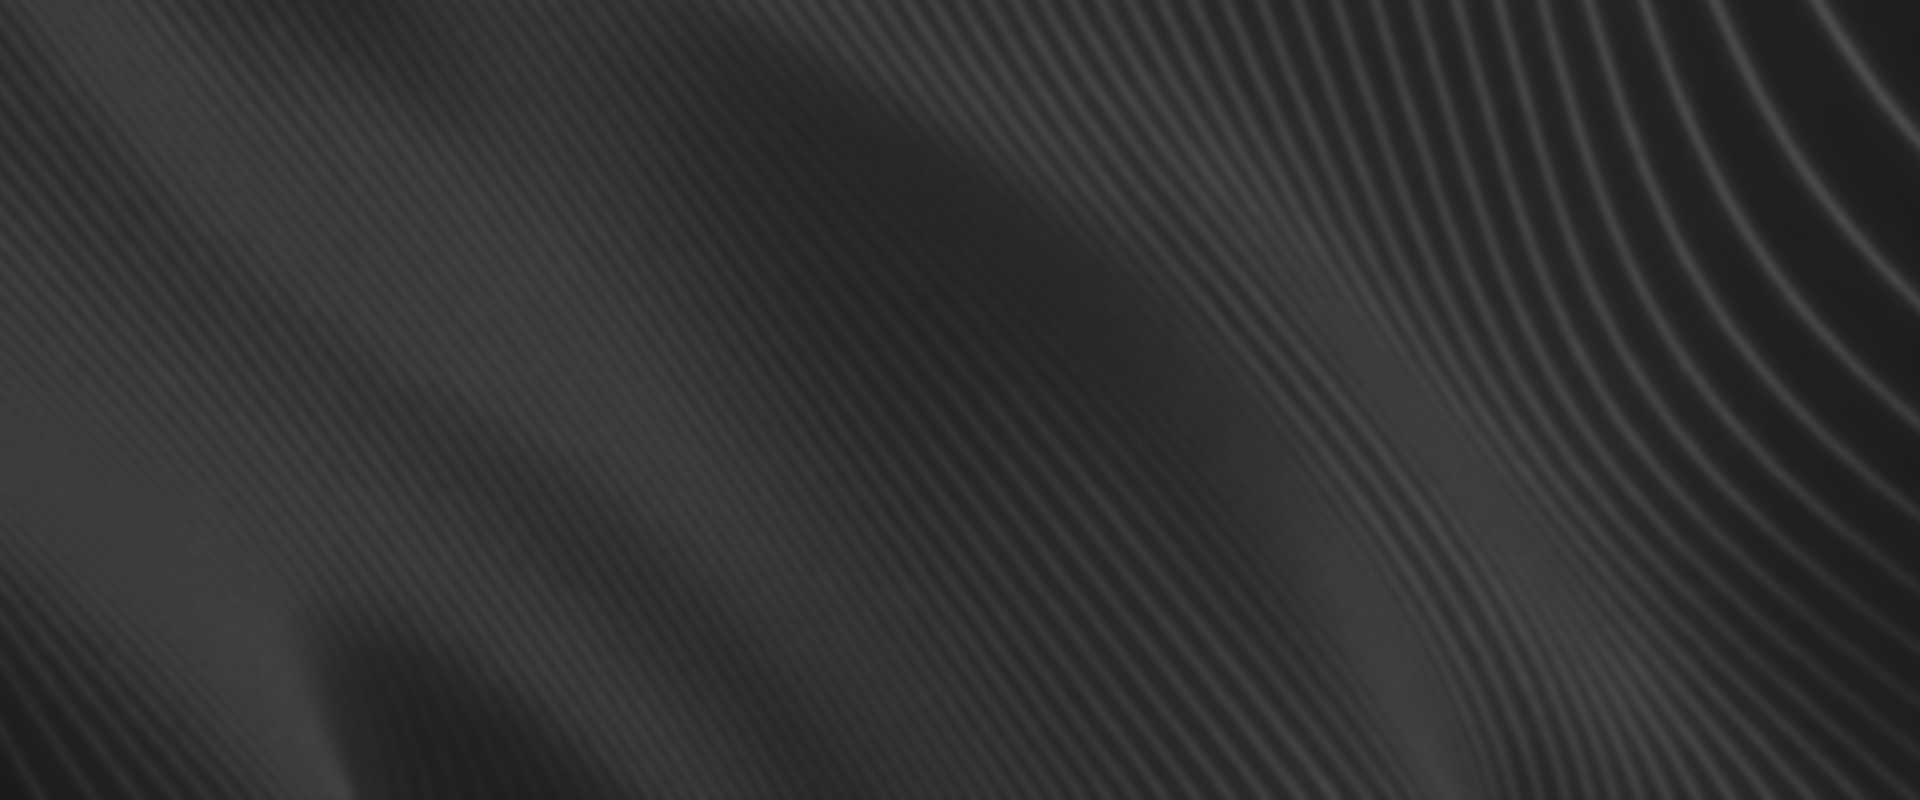 gray background with wavy lines